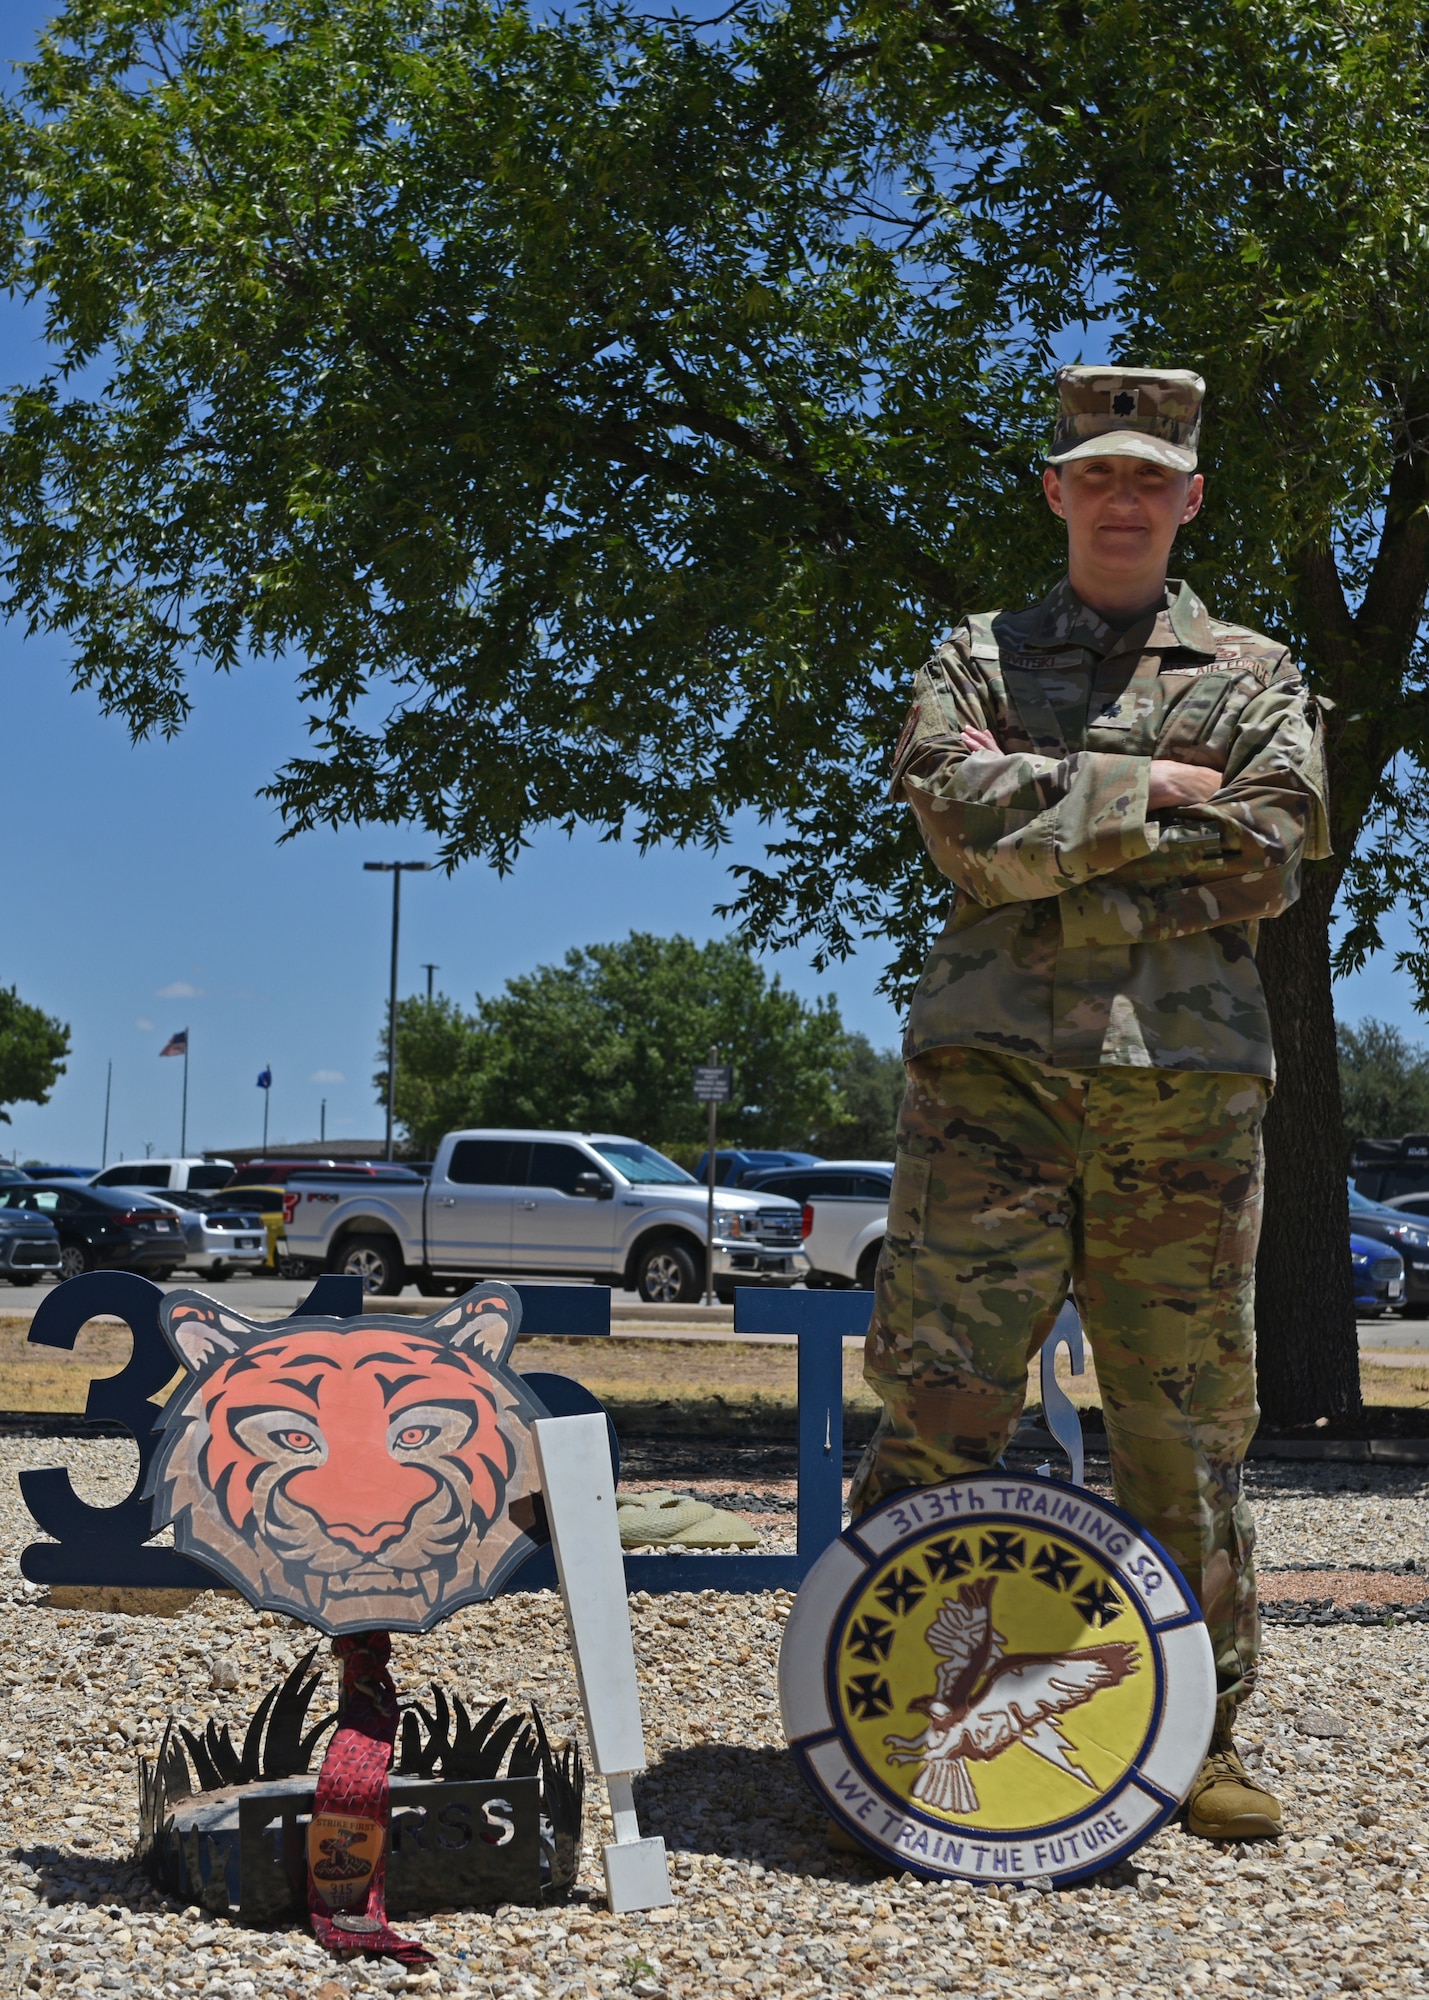 U.S. Air Force Lt. Col. Liane Zivitski, 315th Training Squadron commander, poses for a photo with the spoils of a prank war at Goodfellow Air Force Base, Texas, July 25, 2022. The squadrons had a prank war during “shark week” to boost morale . (U.S. Air Force photo by Senior Airman Ashley Thrash)